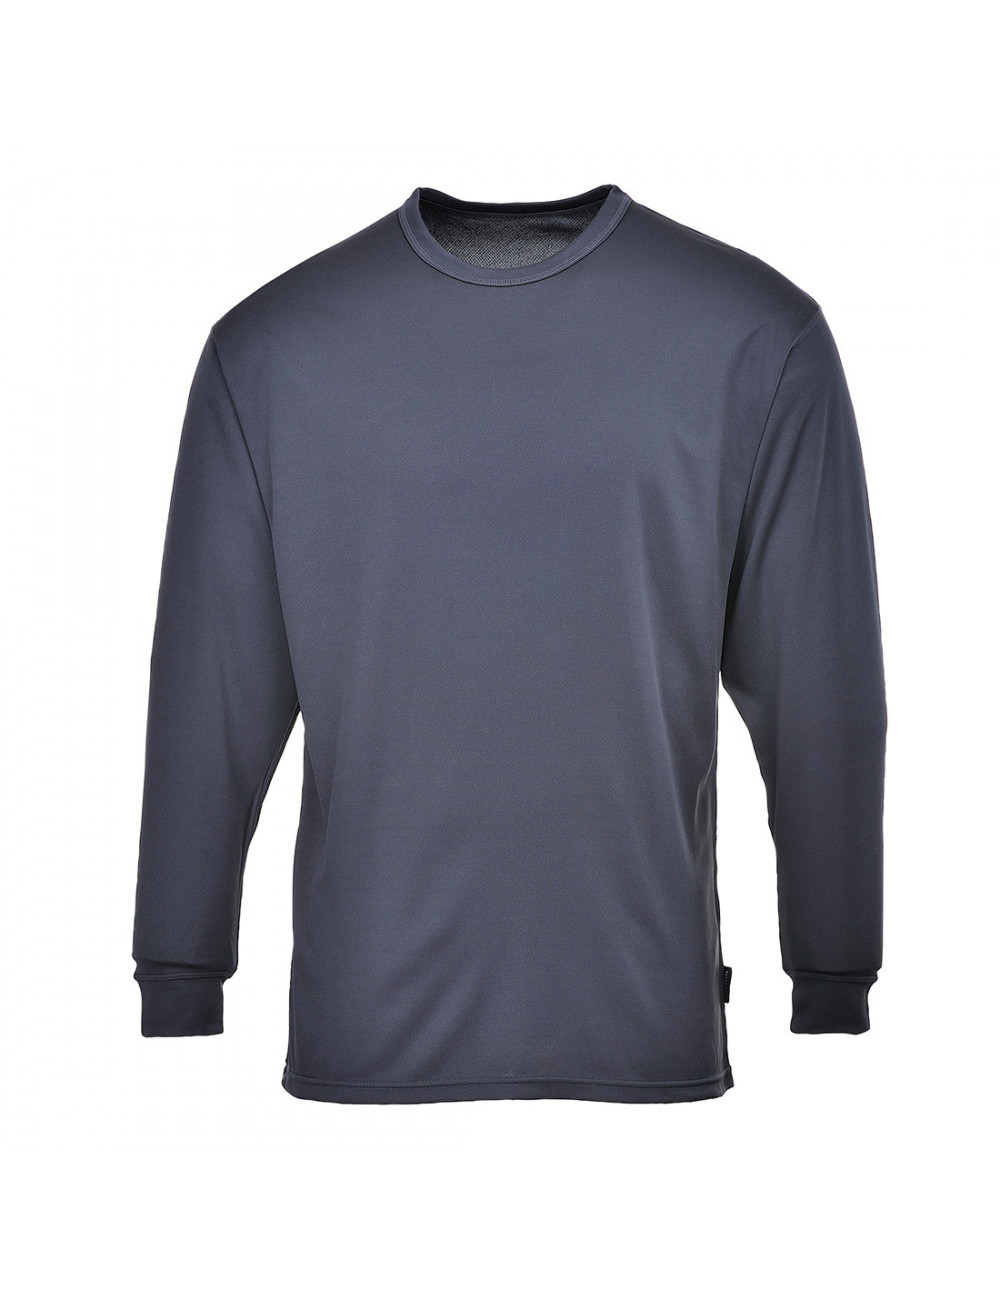 Thermal t-shirt charcoal Portwest